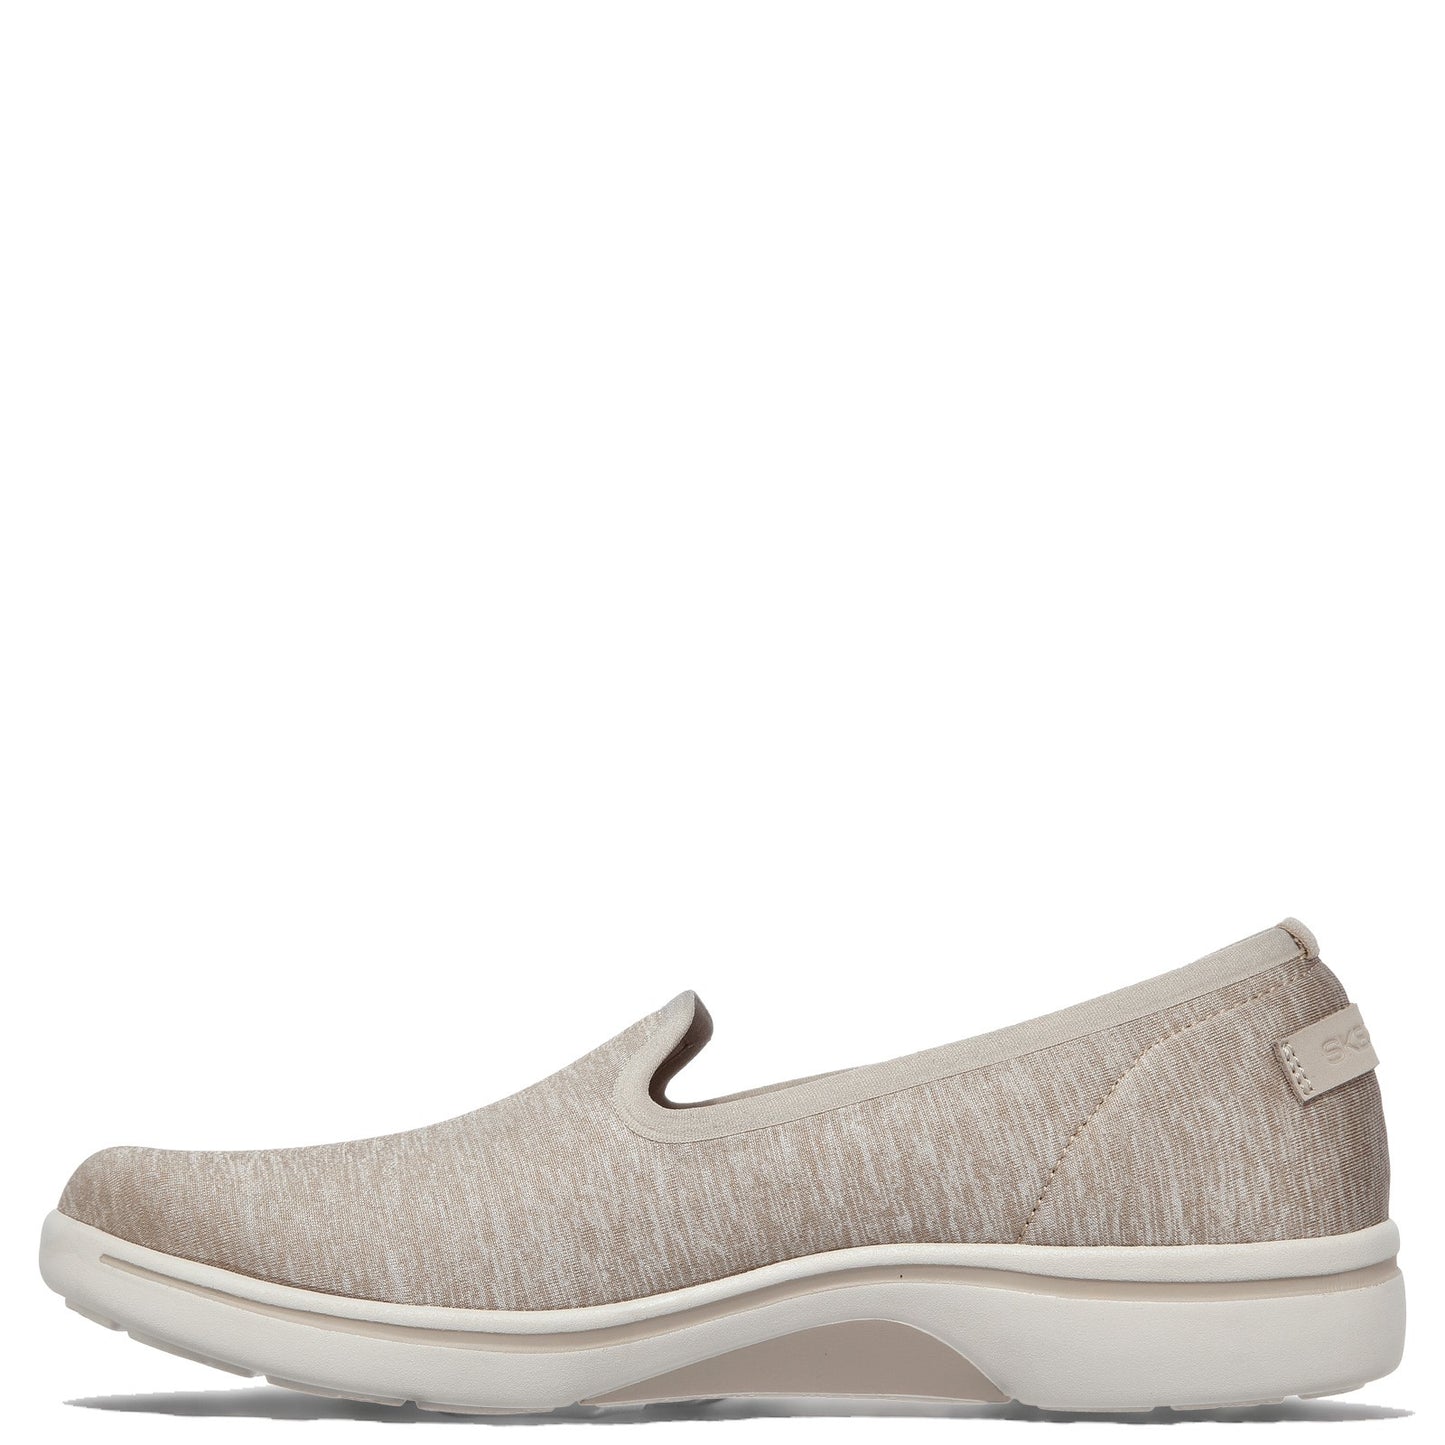 Peltz Shoes  Women's Skechers Arch Fit Uplift - Perceived Slip-On TAUPE 136564-TPE